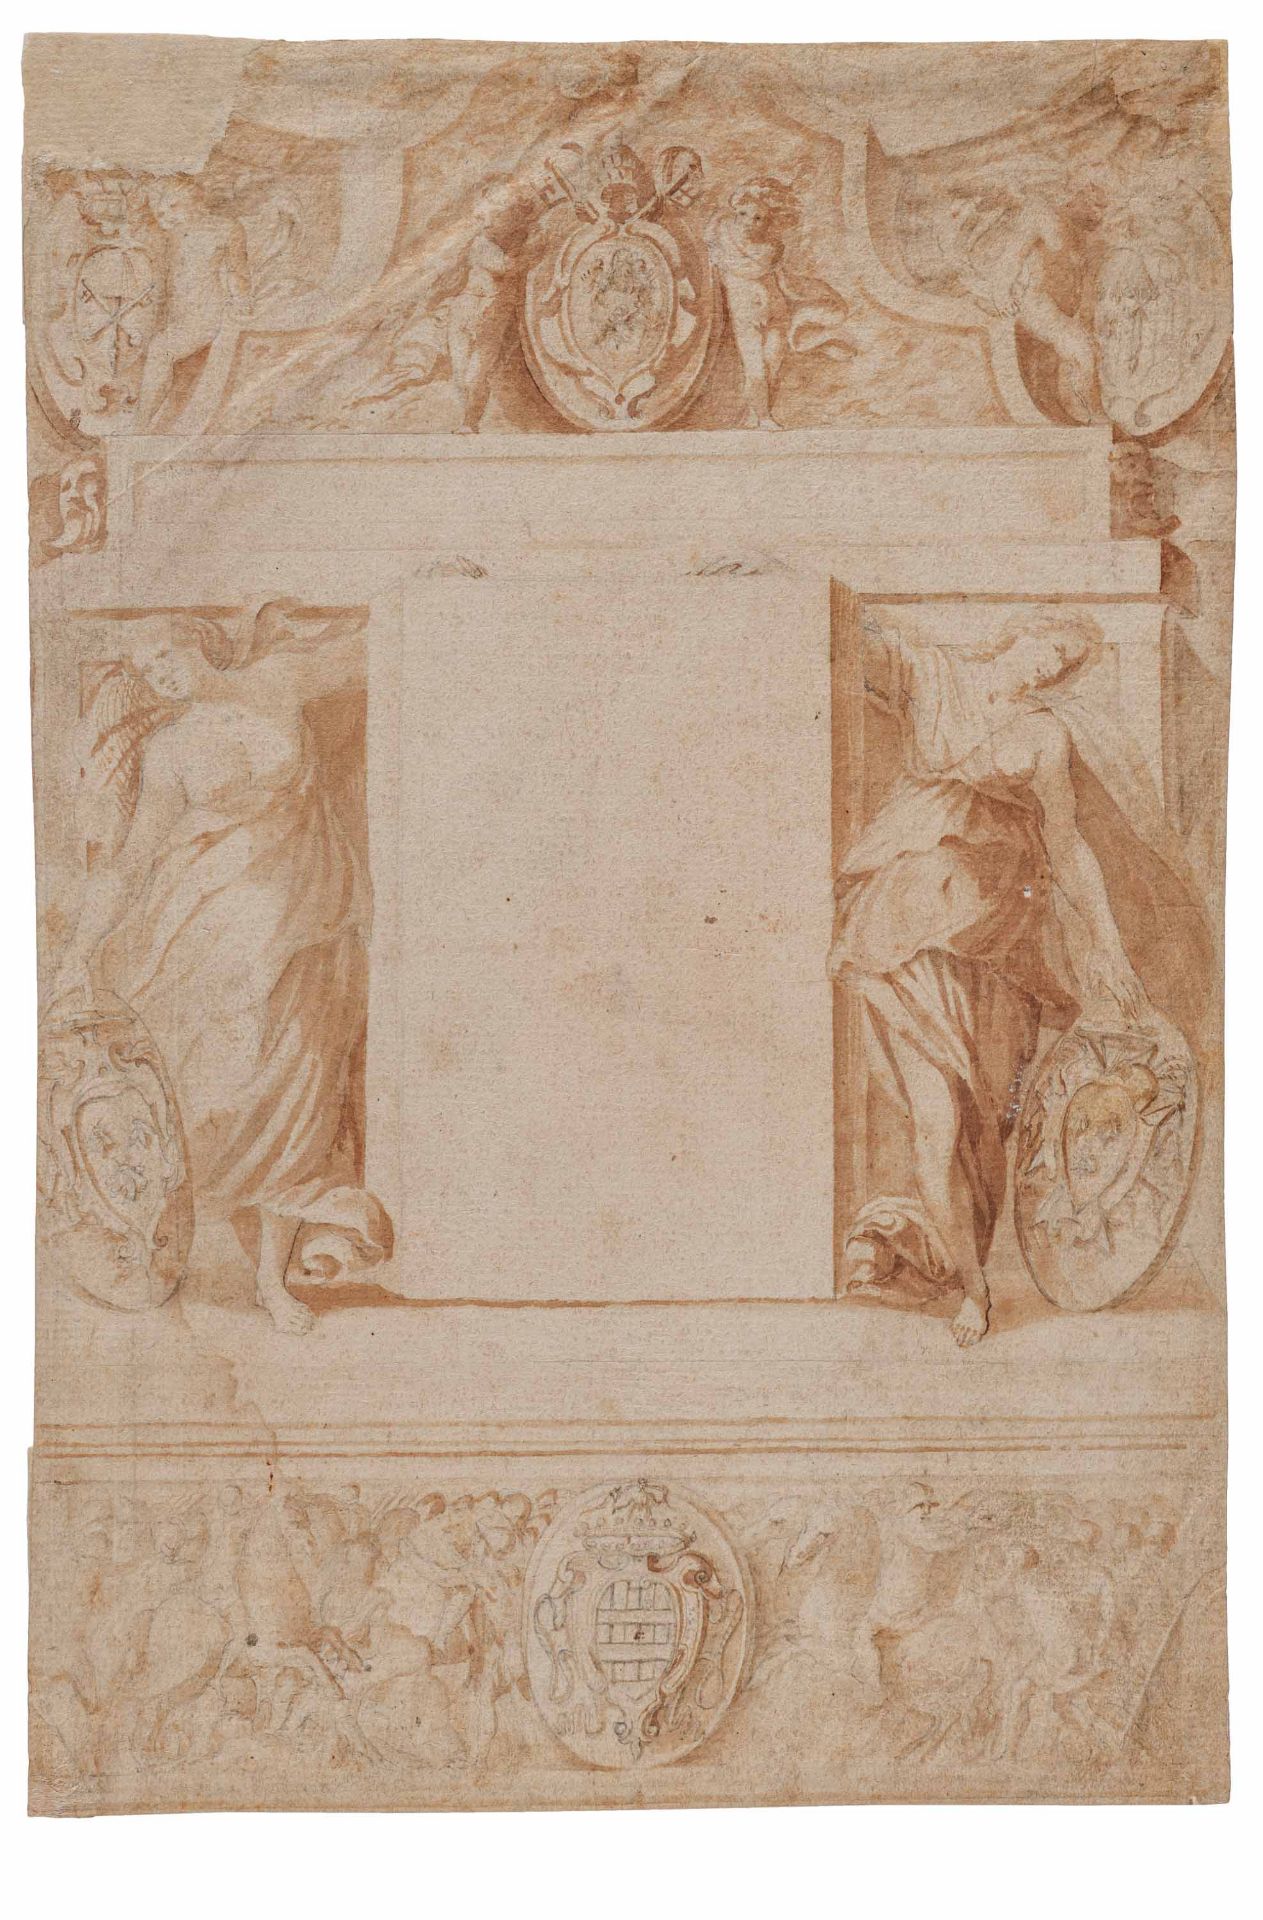 Andrea Camassei: Decoration Project with the Crest of the Barberini Family